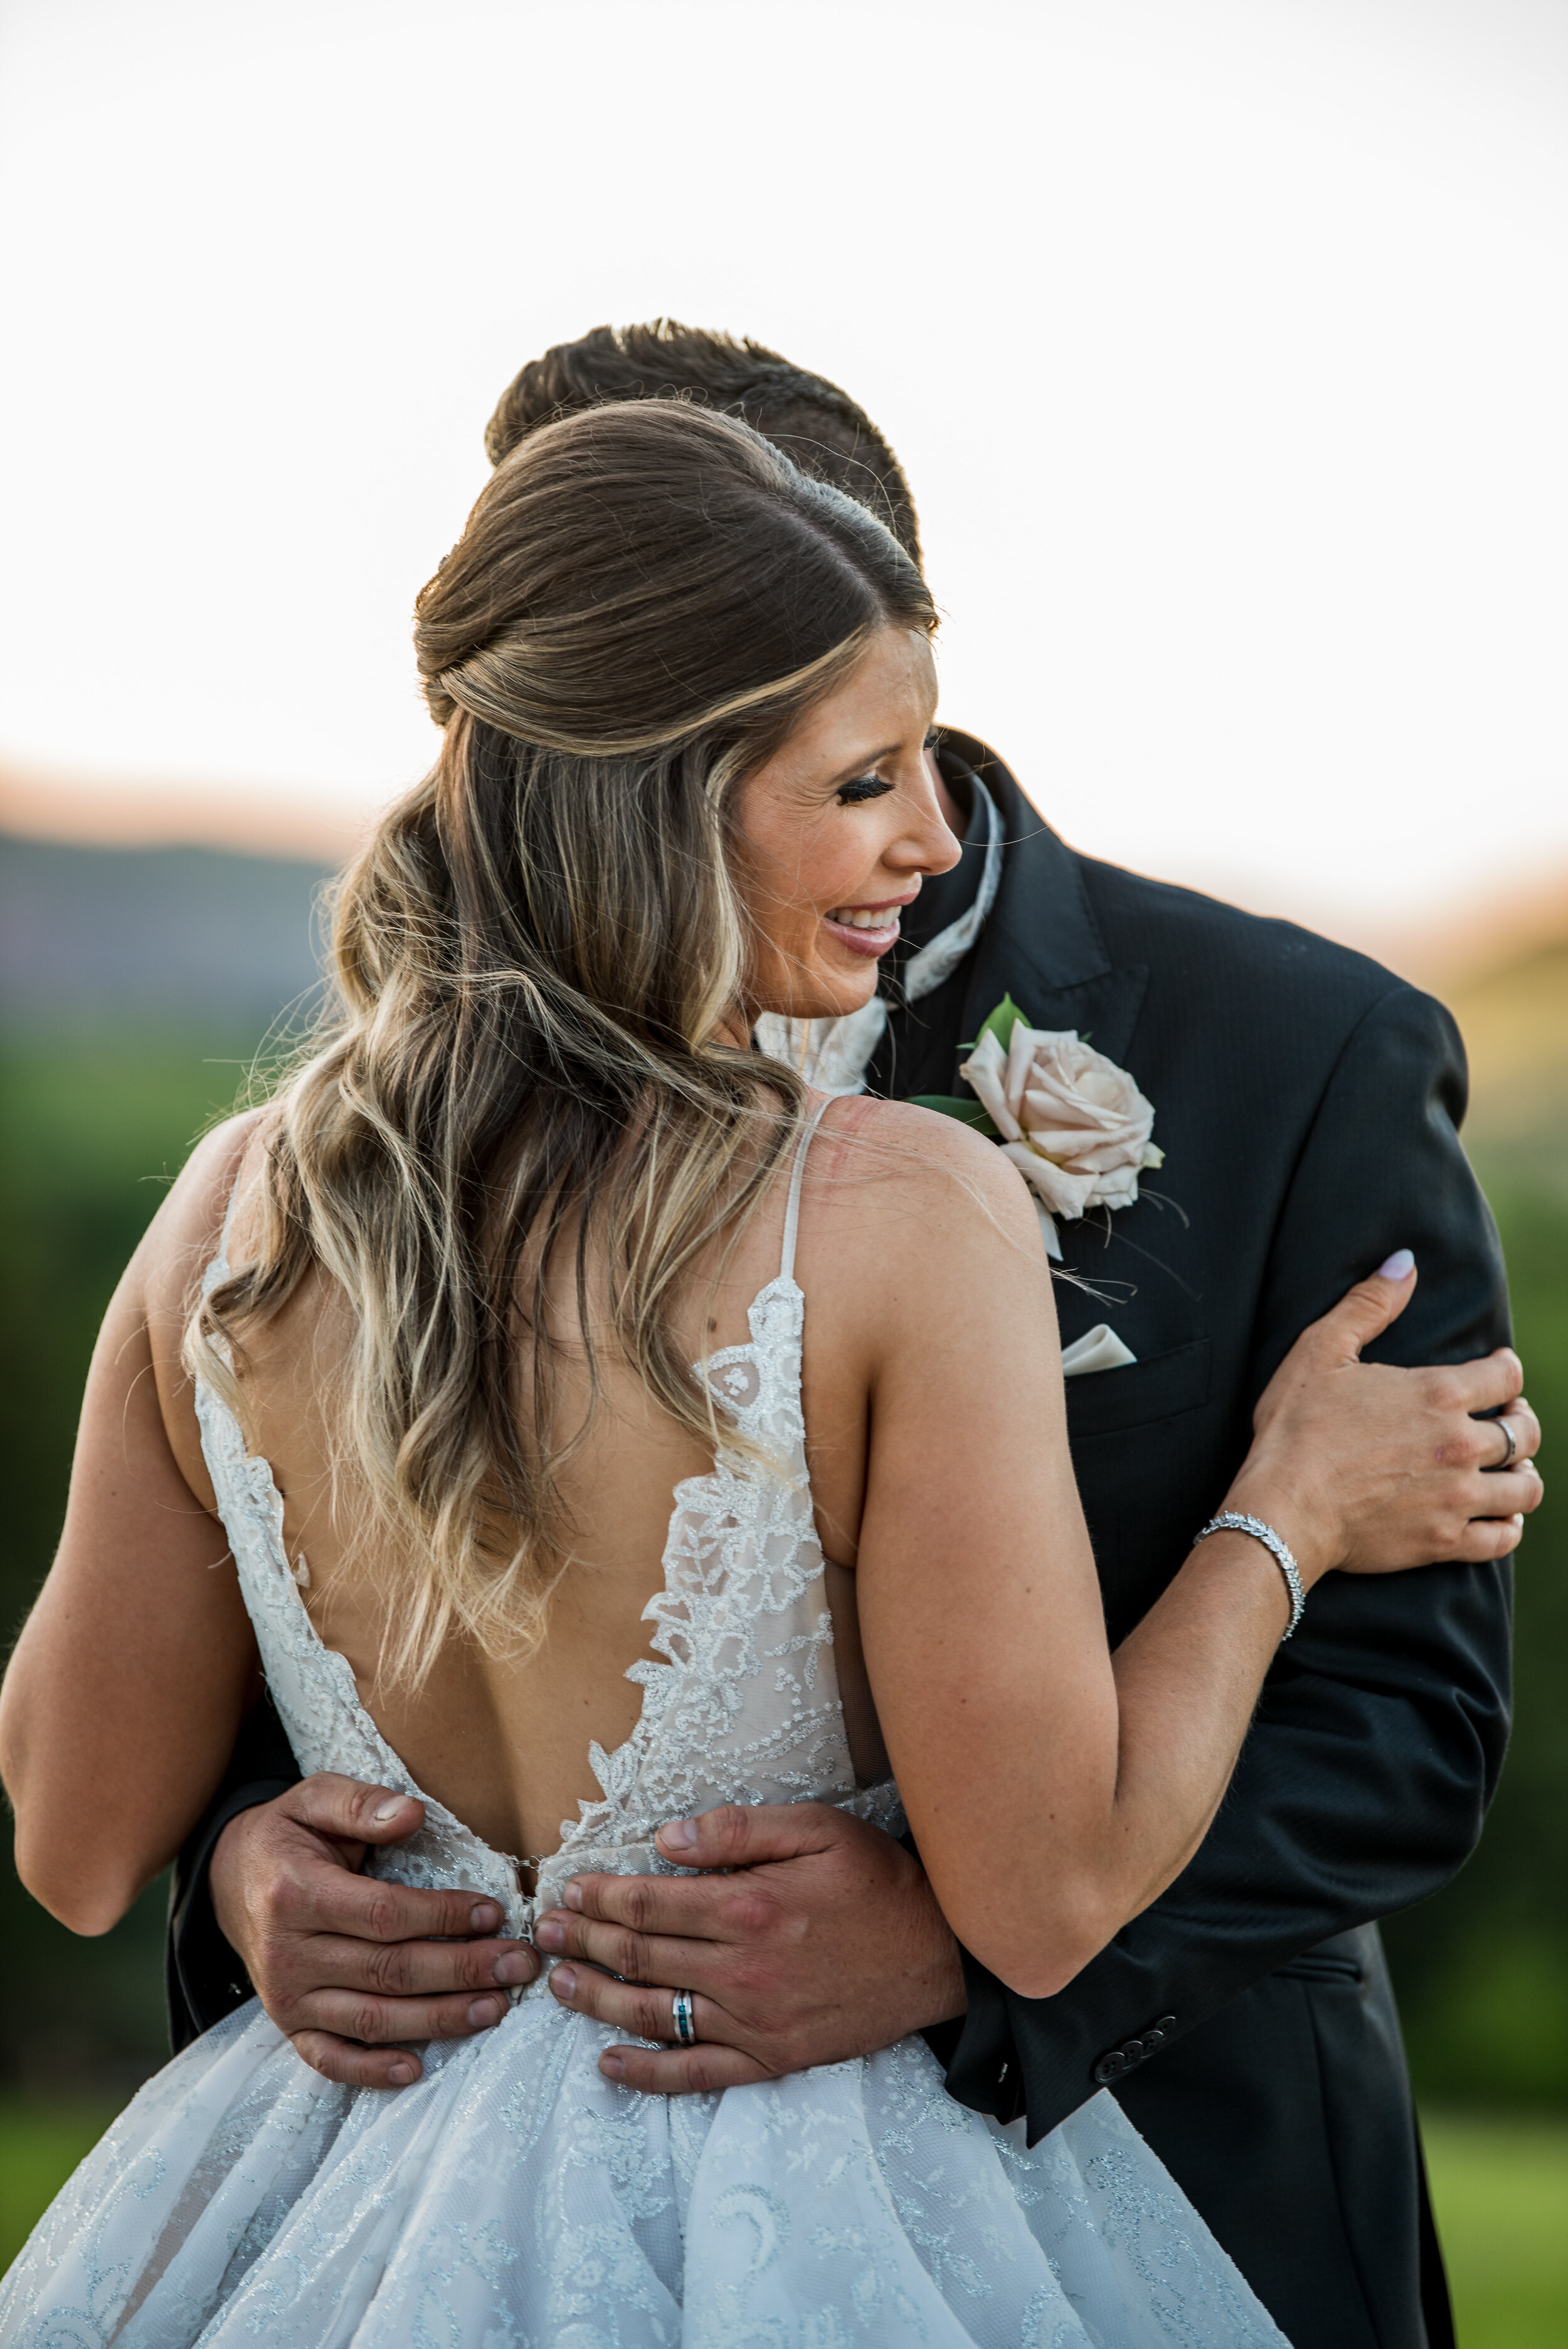  Victoria and Anthony’s Colorado outdoor summer wedding in Hayley Paige Markle wedding dress 